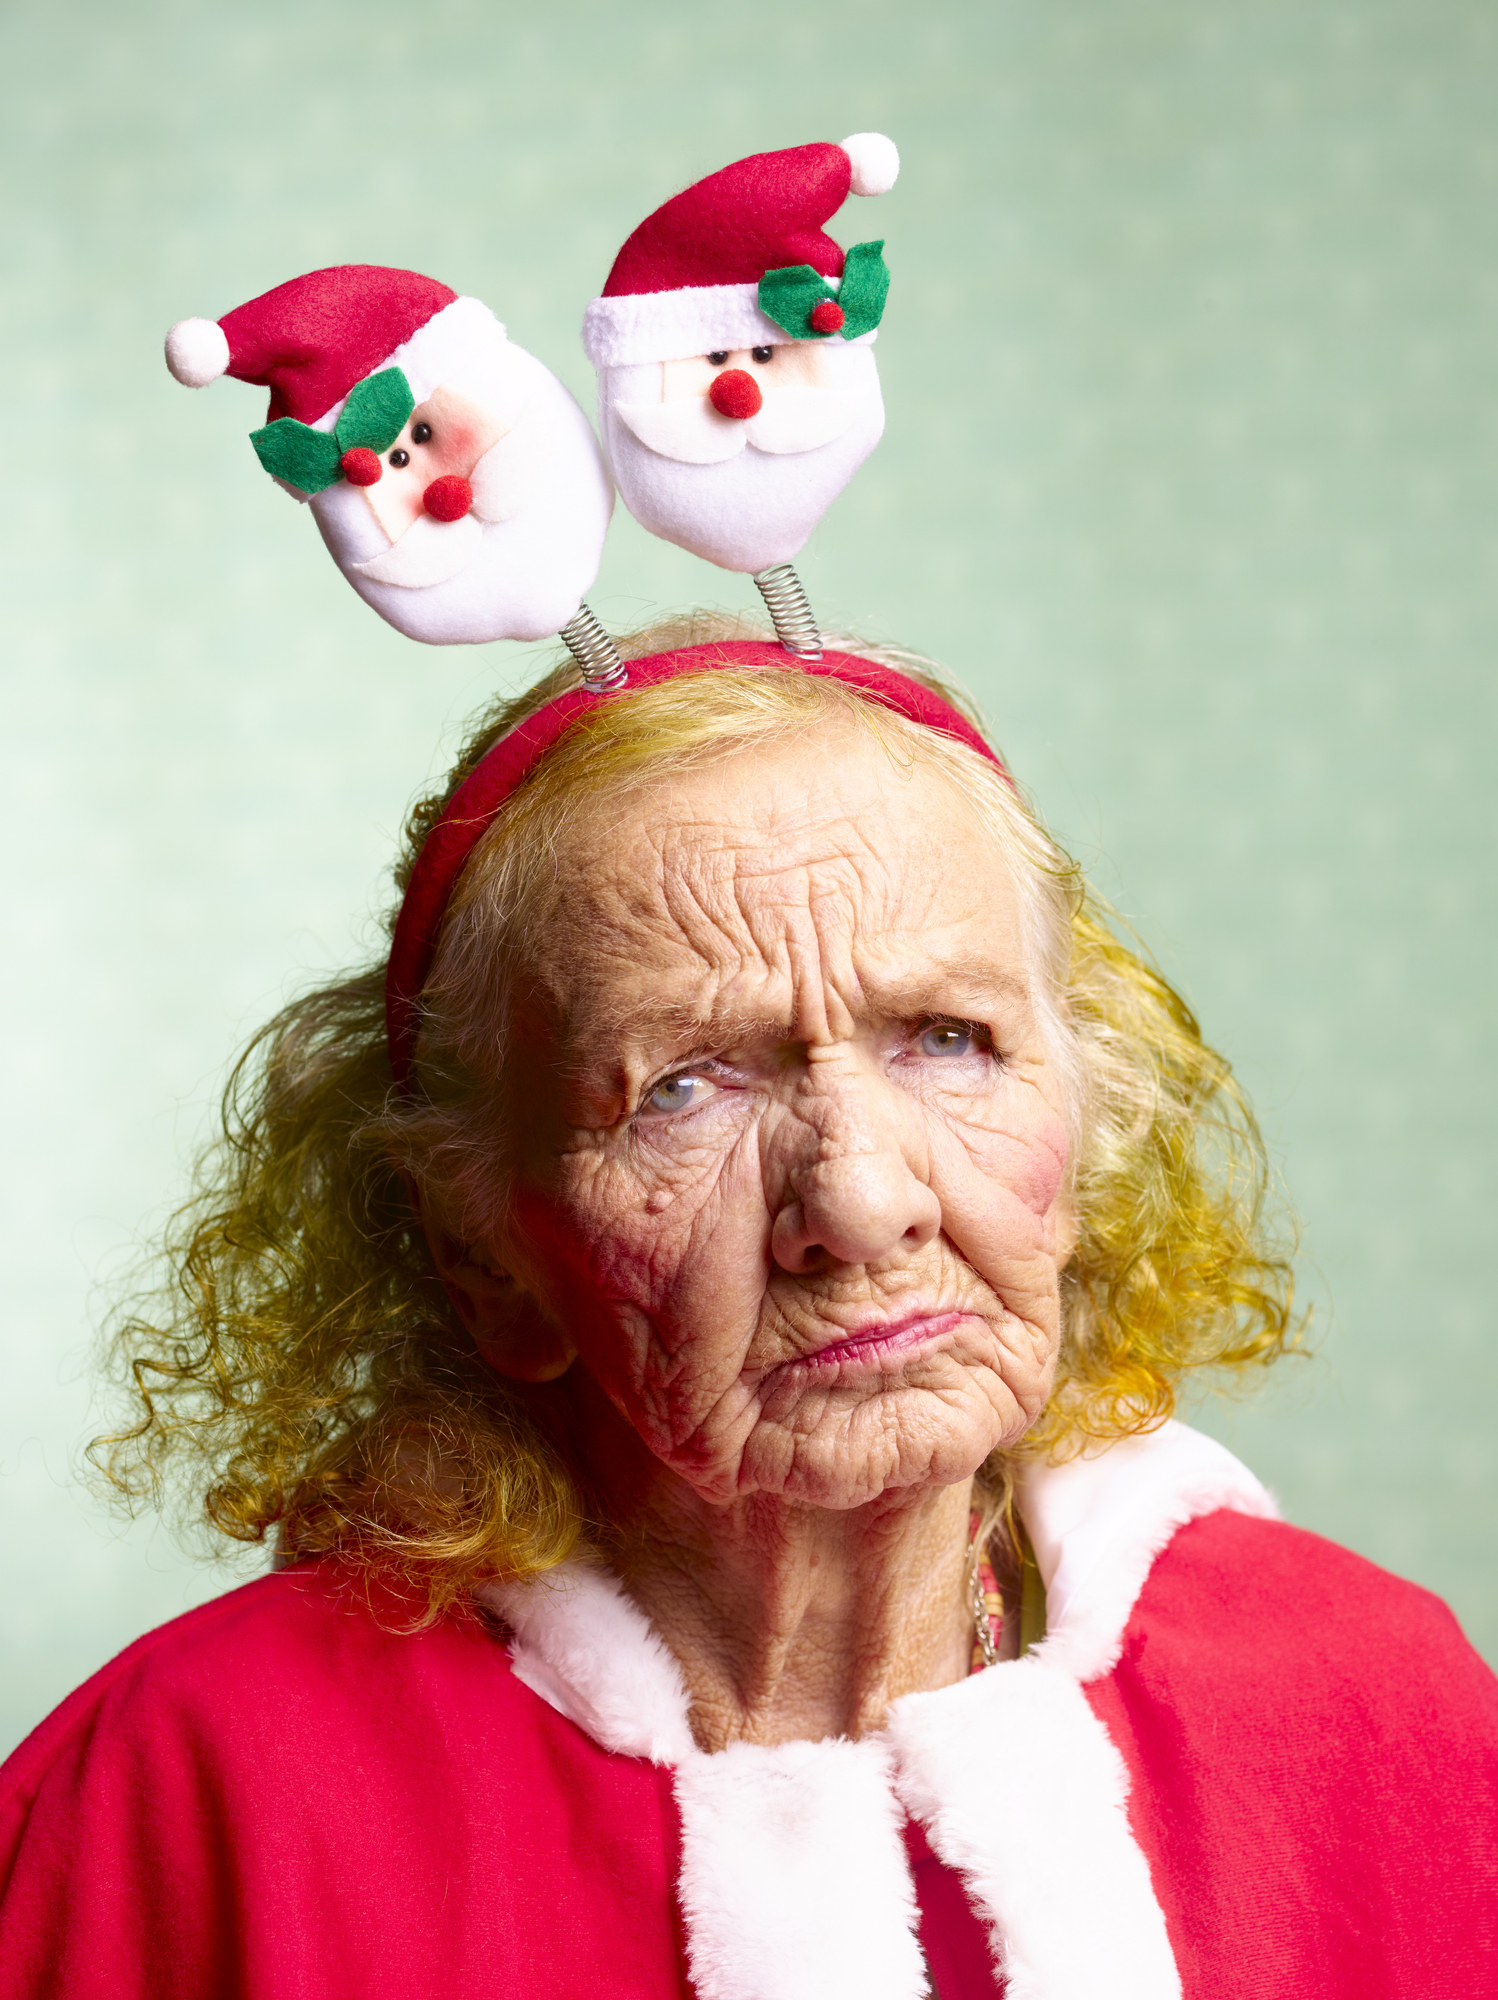 An older woman looking angry dressed up for Christmas